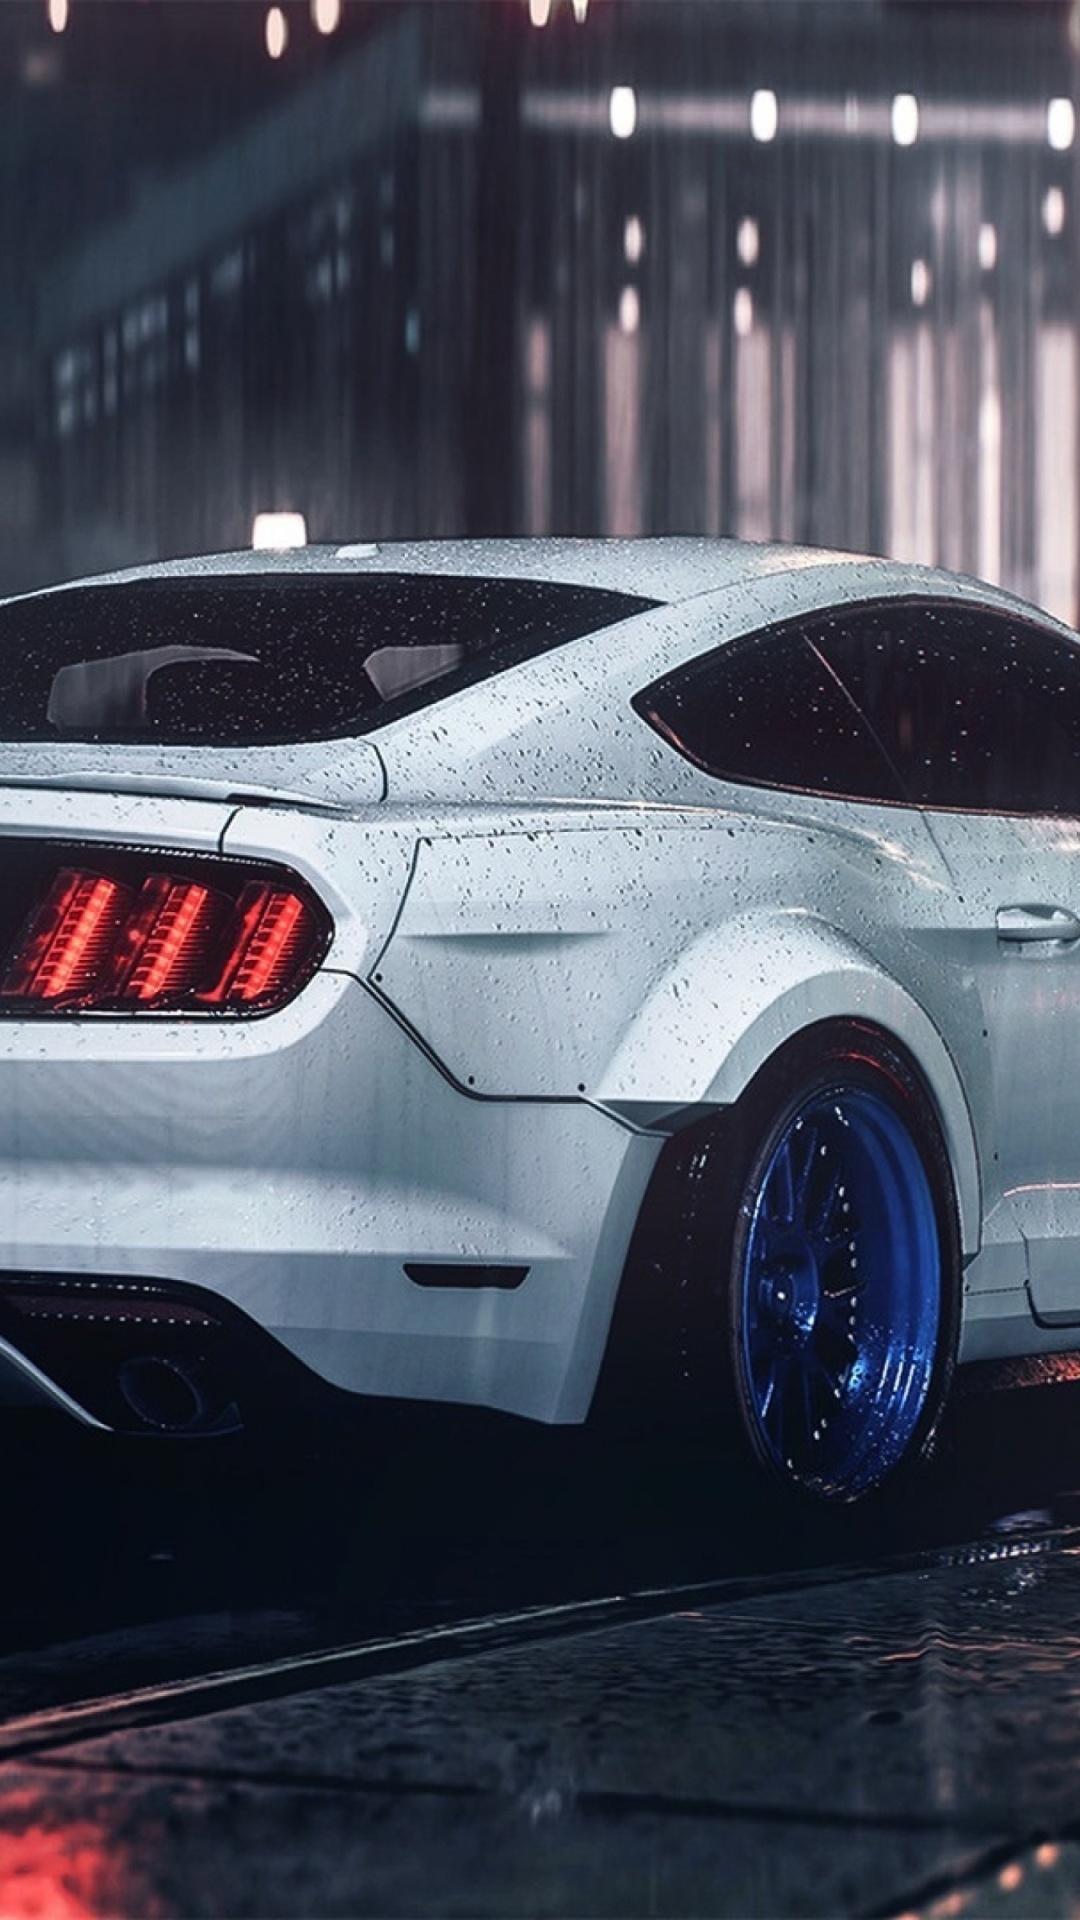 Ford Mustang Shelby GT350 wallpaper 1080x1920